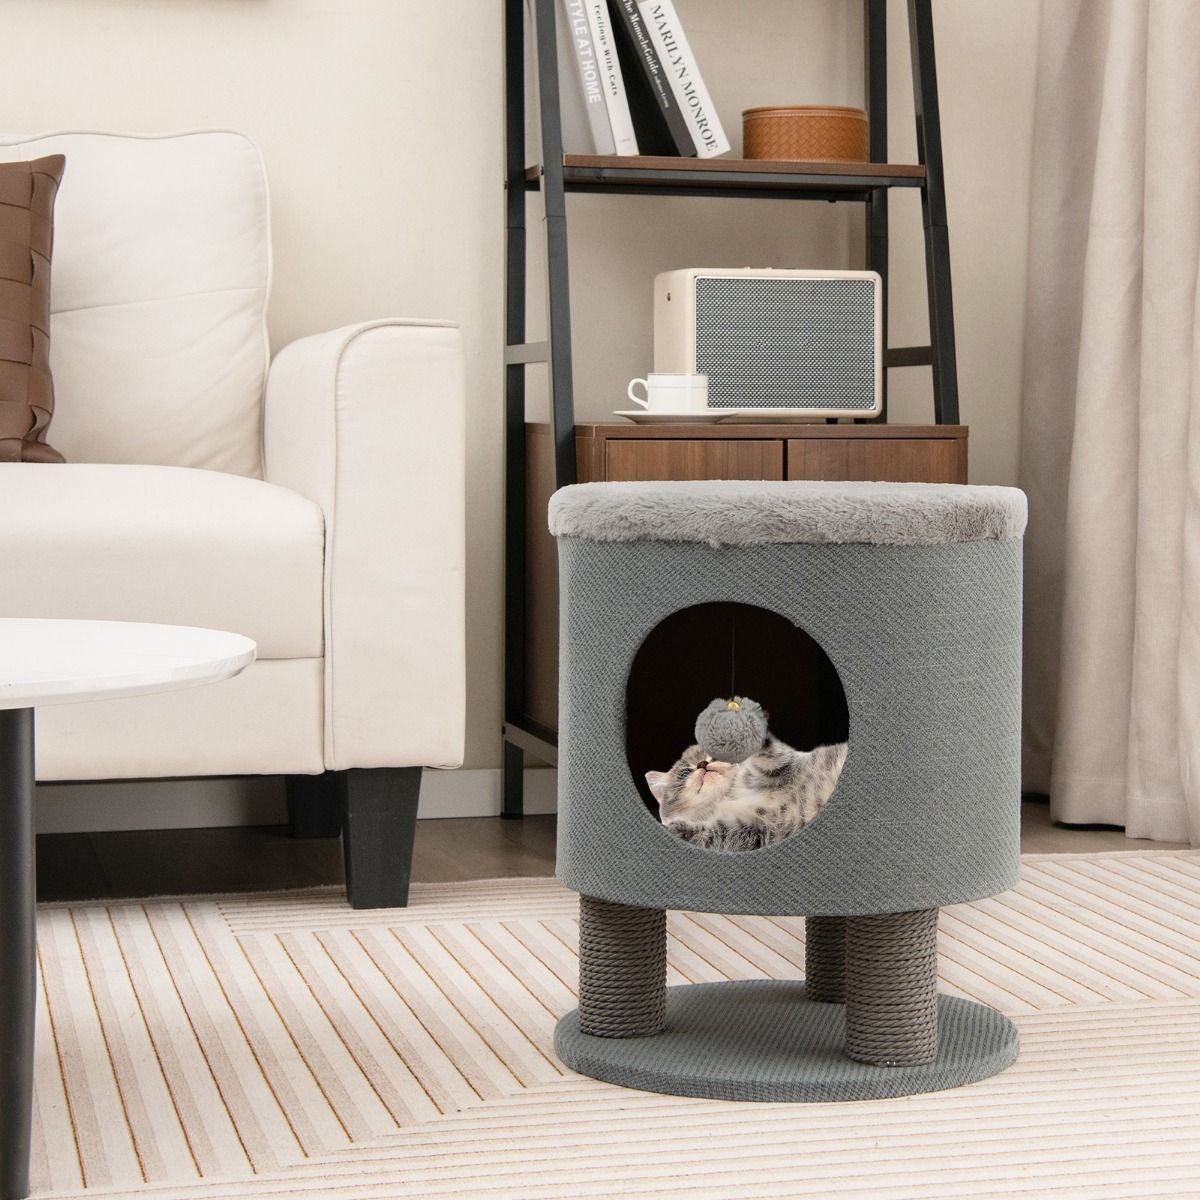 Cat Condo Stool for Indoor Cats with Scratching Posts and Plush Ball Toy